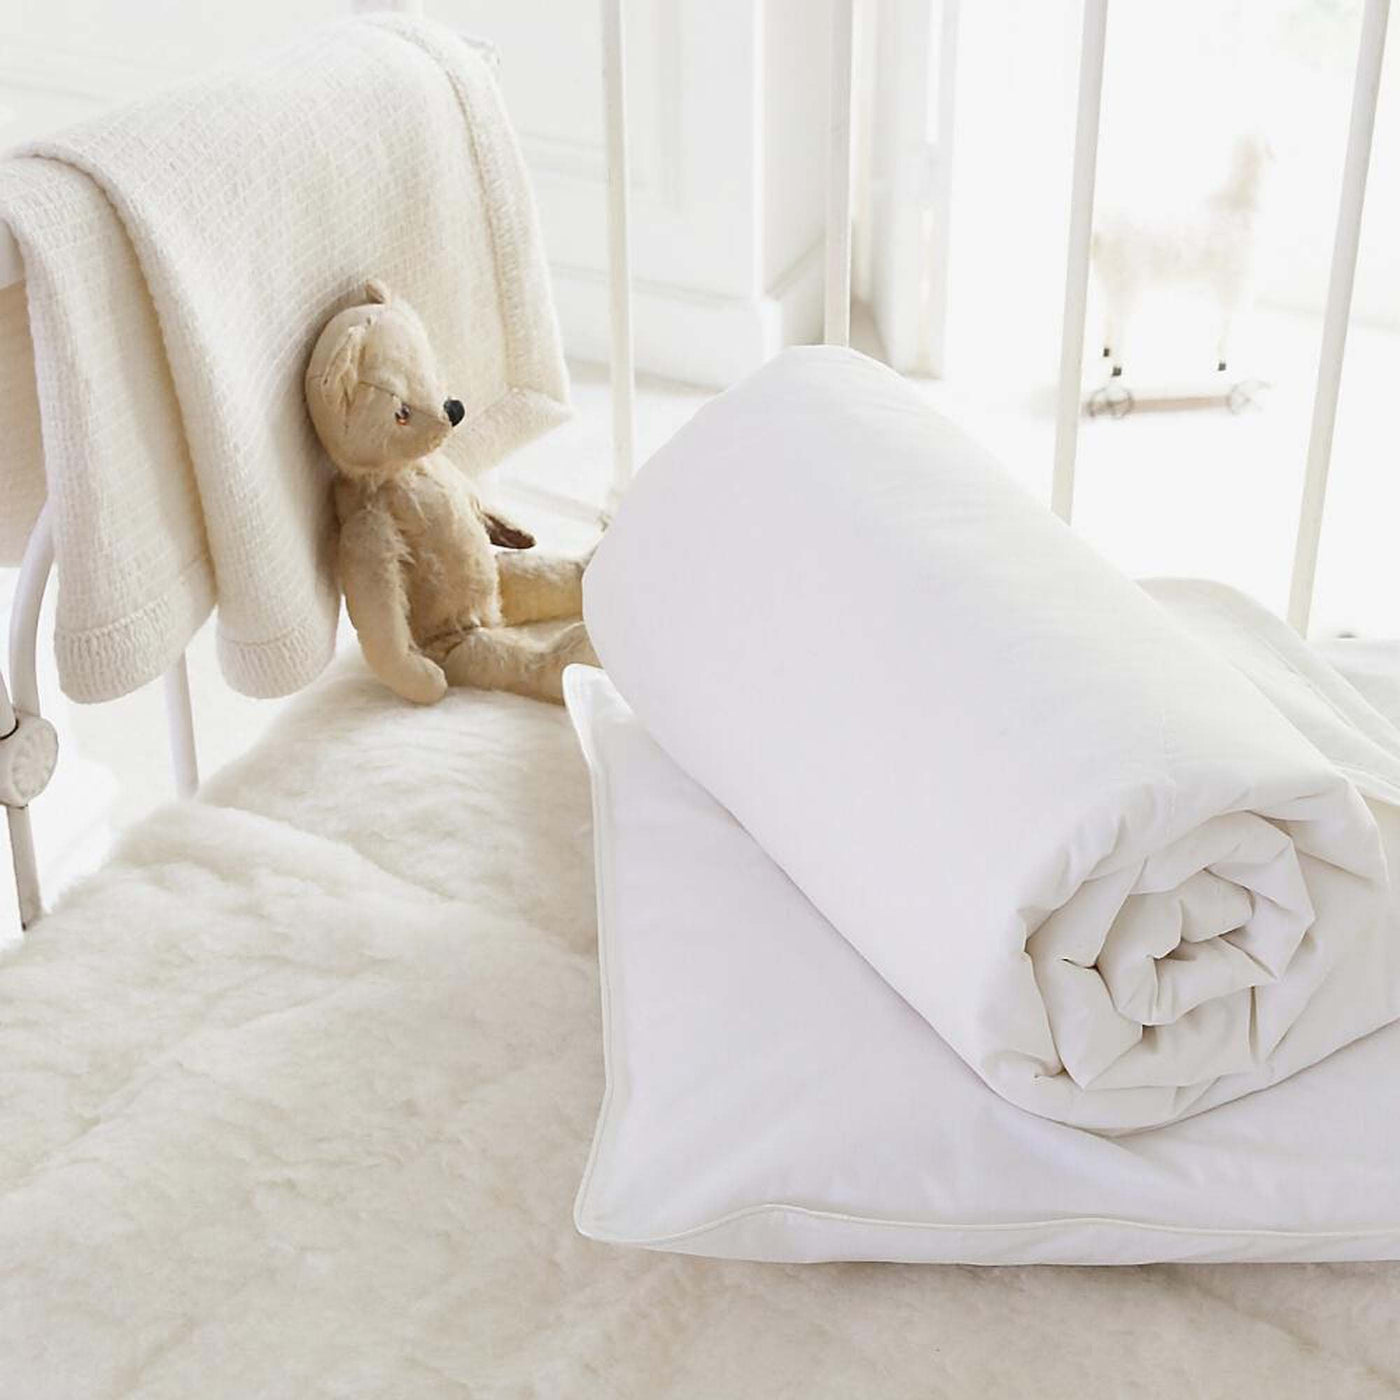 Wool Childrens Nursery Duvets and Pillows Collection